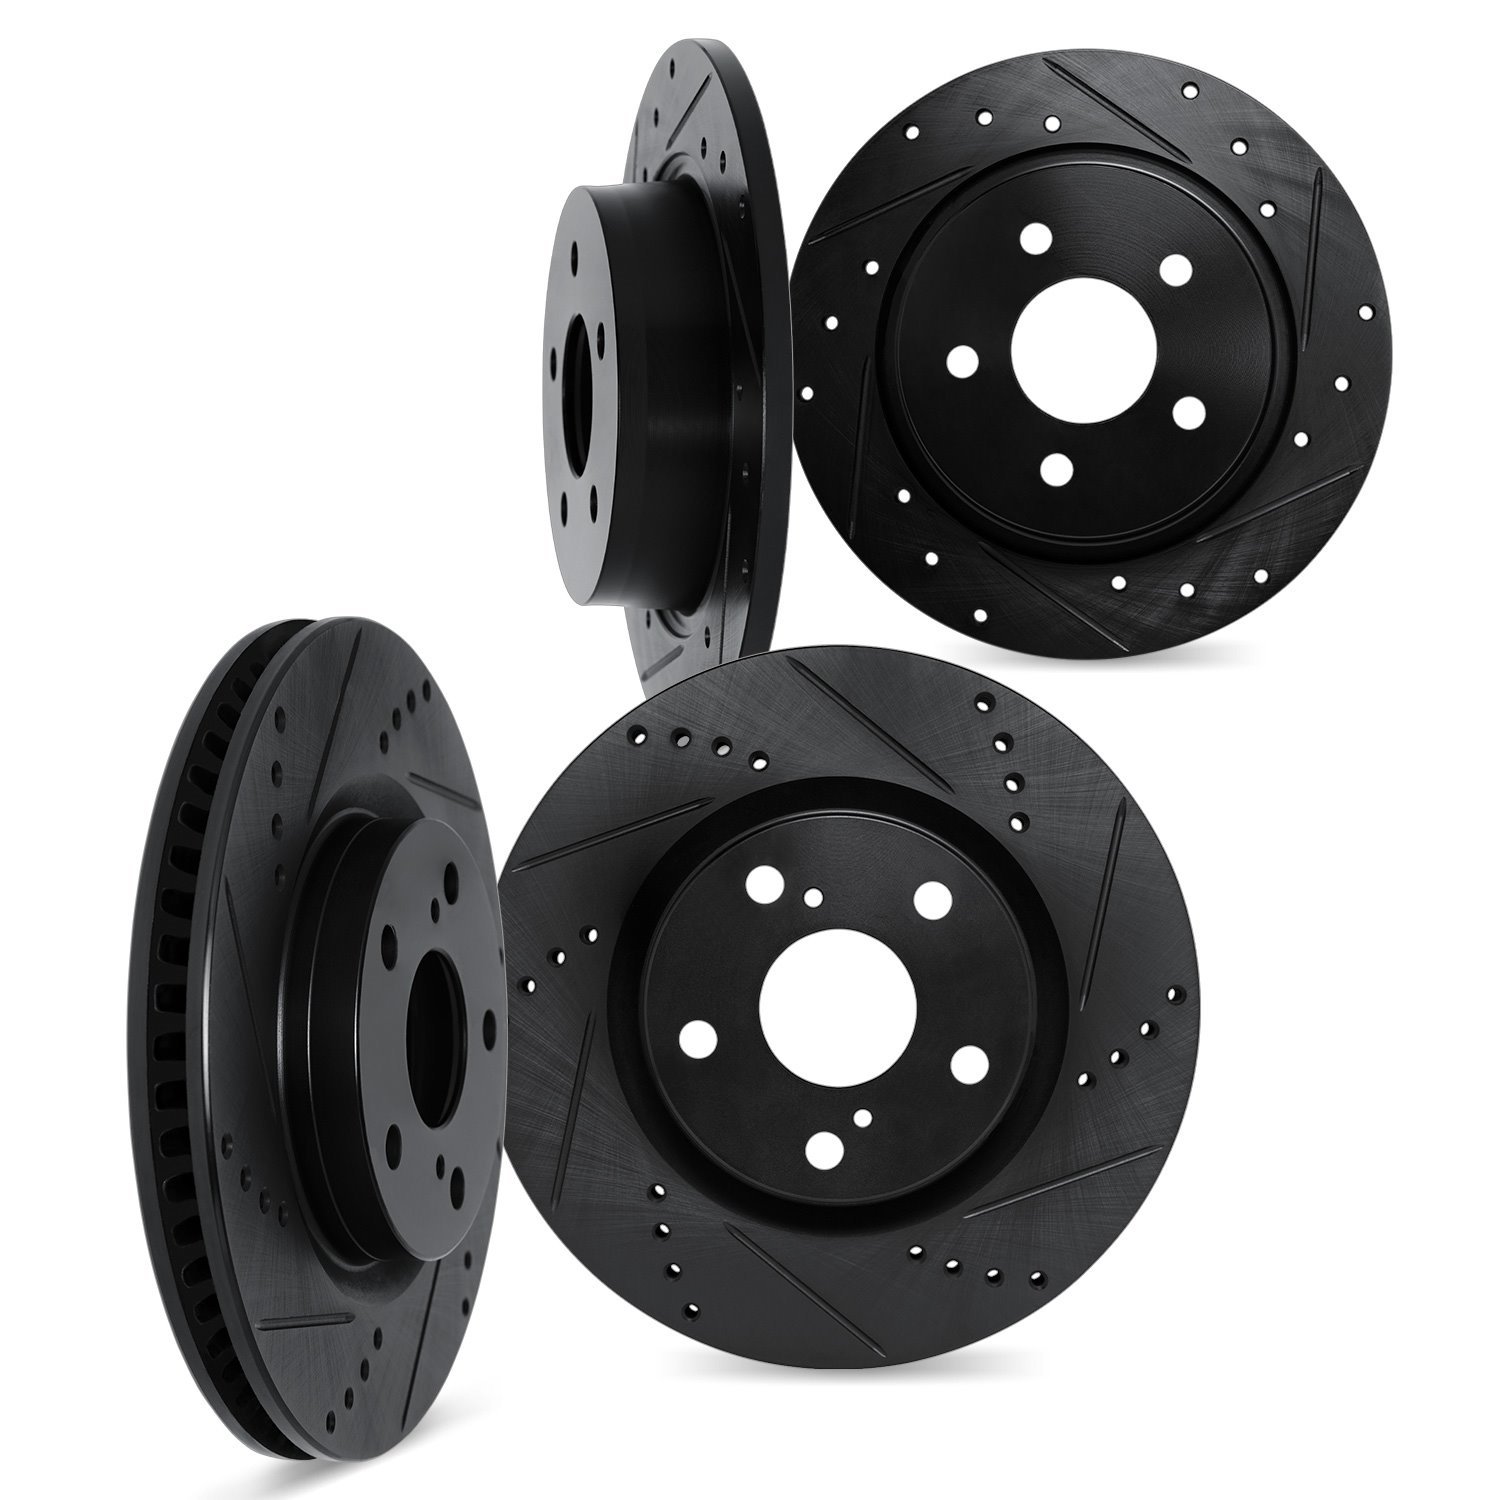 8004-58026 Drilled/Slotted Brake Rotors [Black], 2009-2014 Acura/Honda, Position: Front and Rear